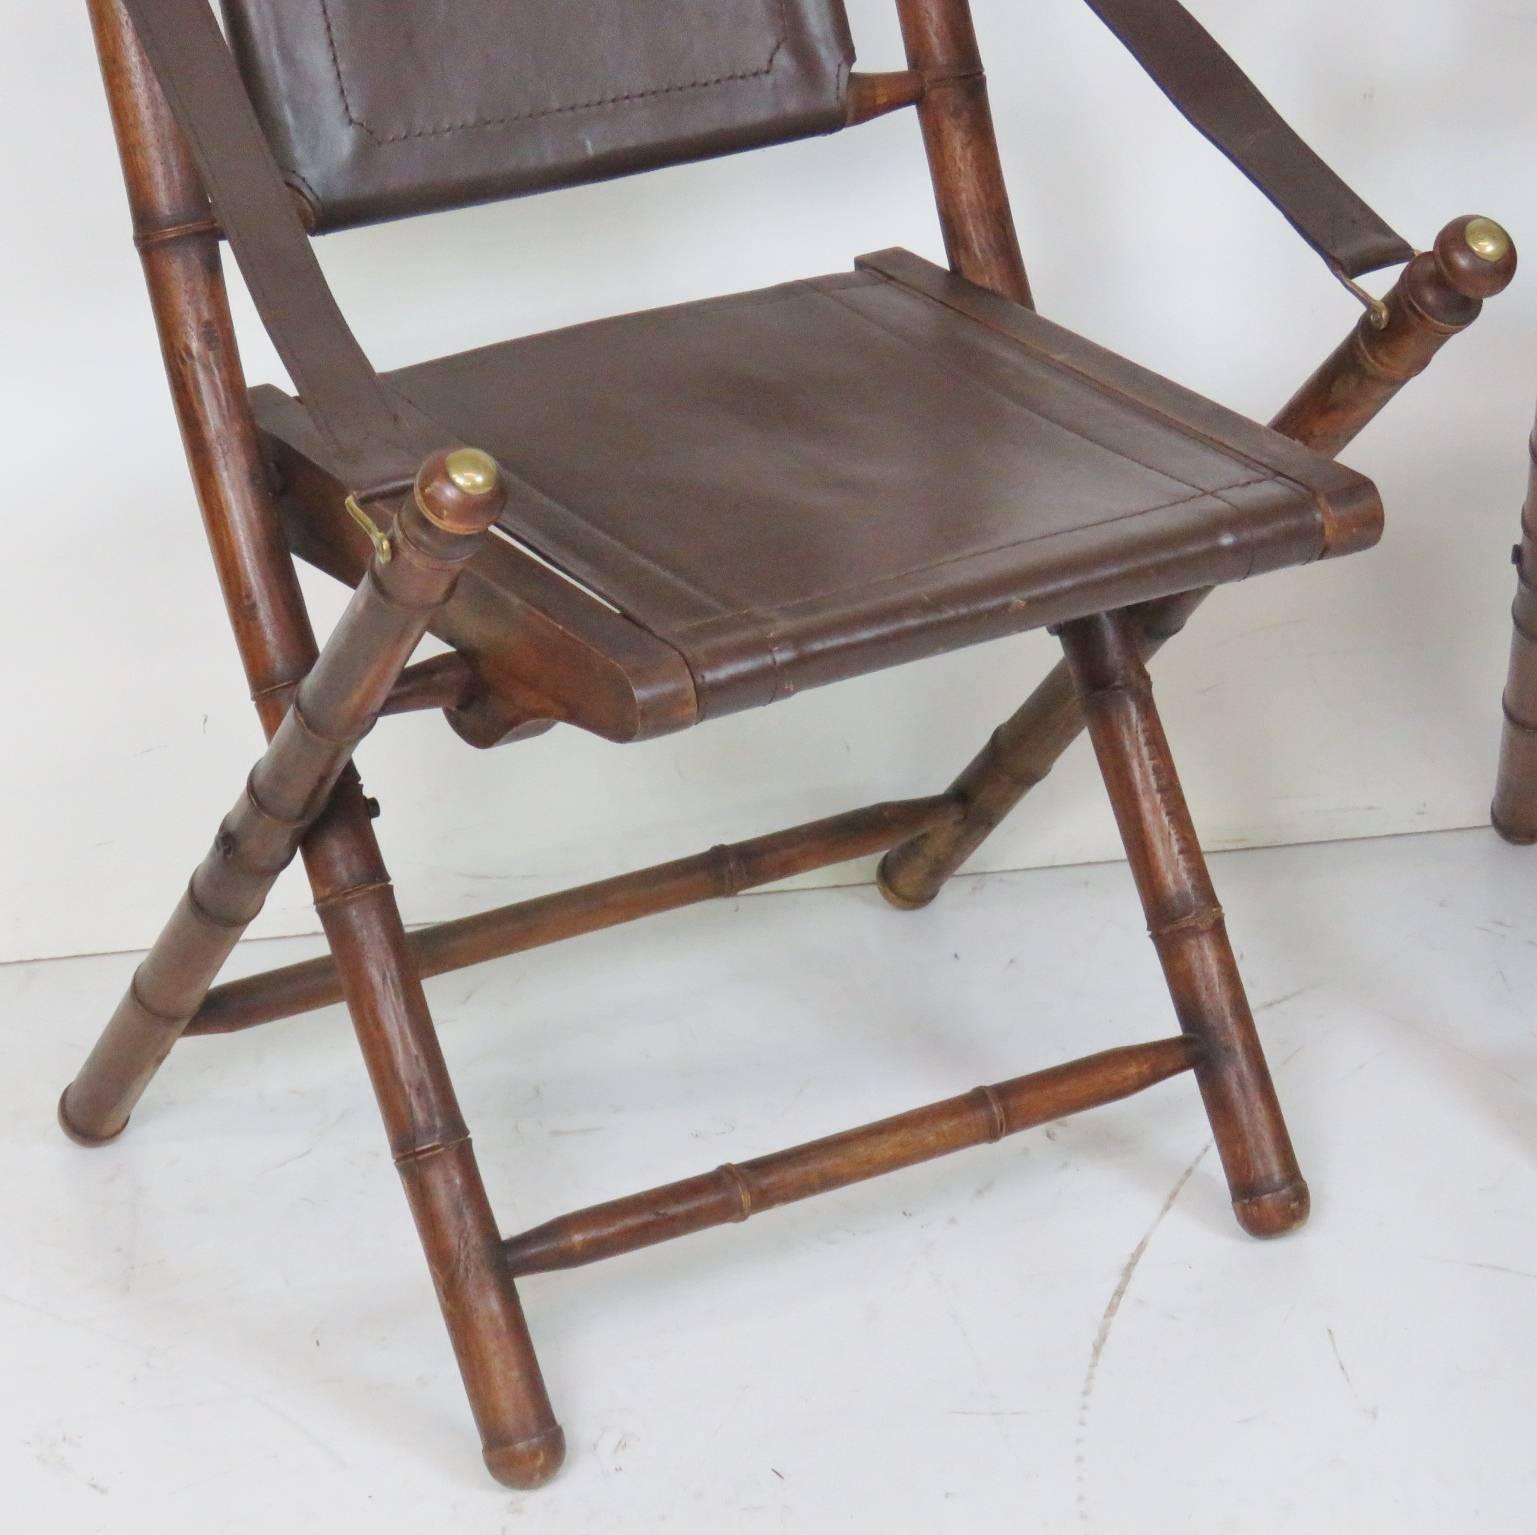 Faux bamboo frame with brown leather back and seat.